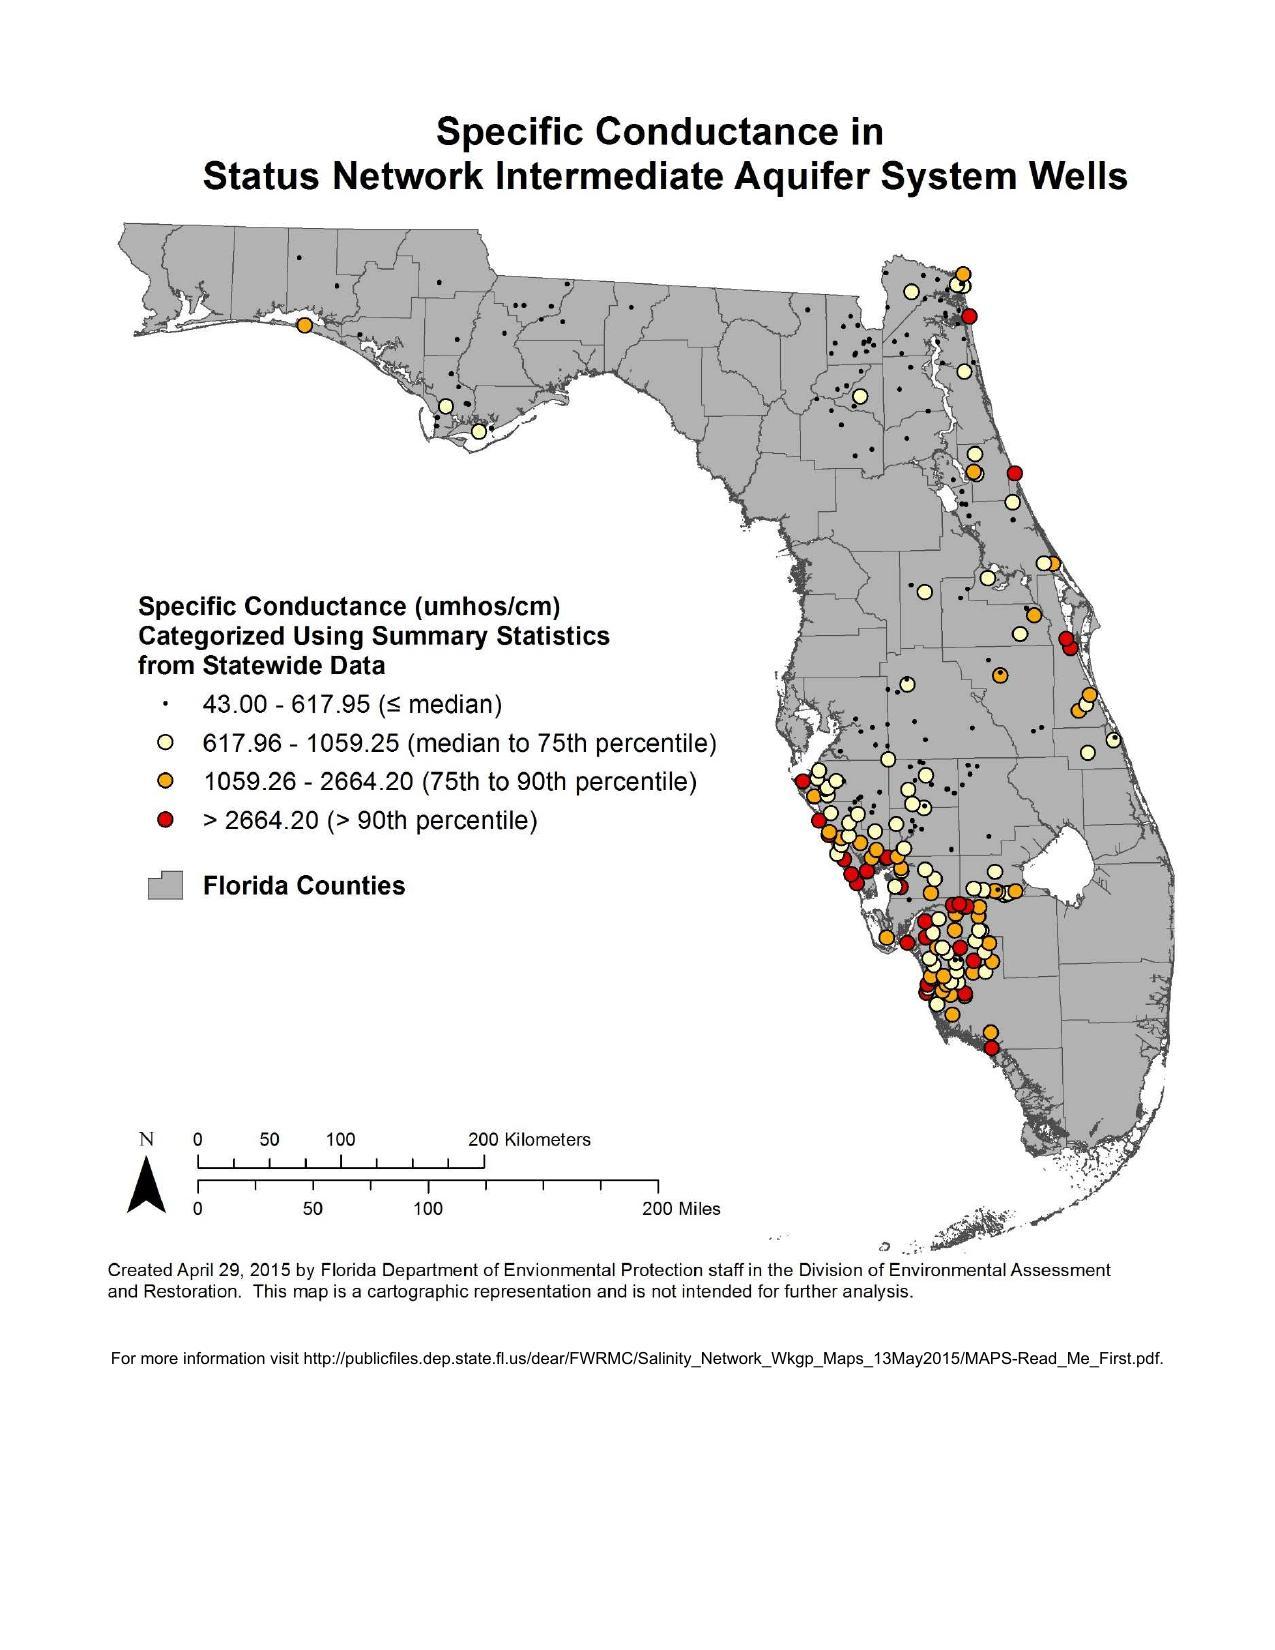 1275x1650 Specific Conductance in Status Network Intermediate Aquifer System Wells, in Florida Well Salinity Study, by FL-DEP, 13 July 2015